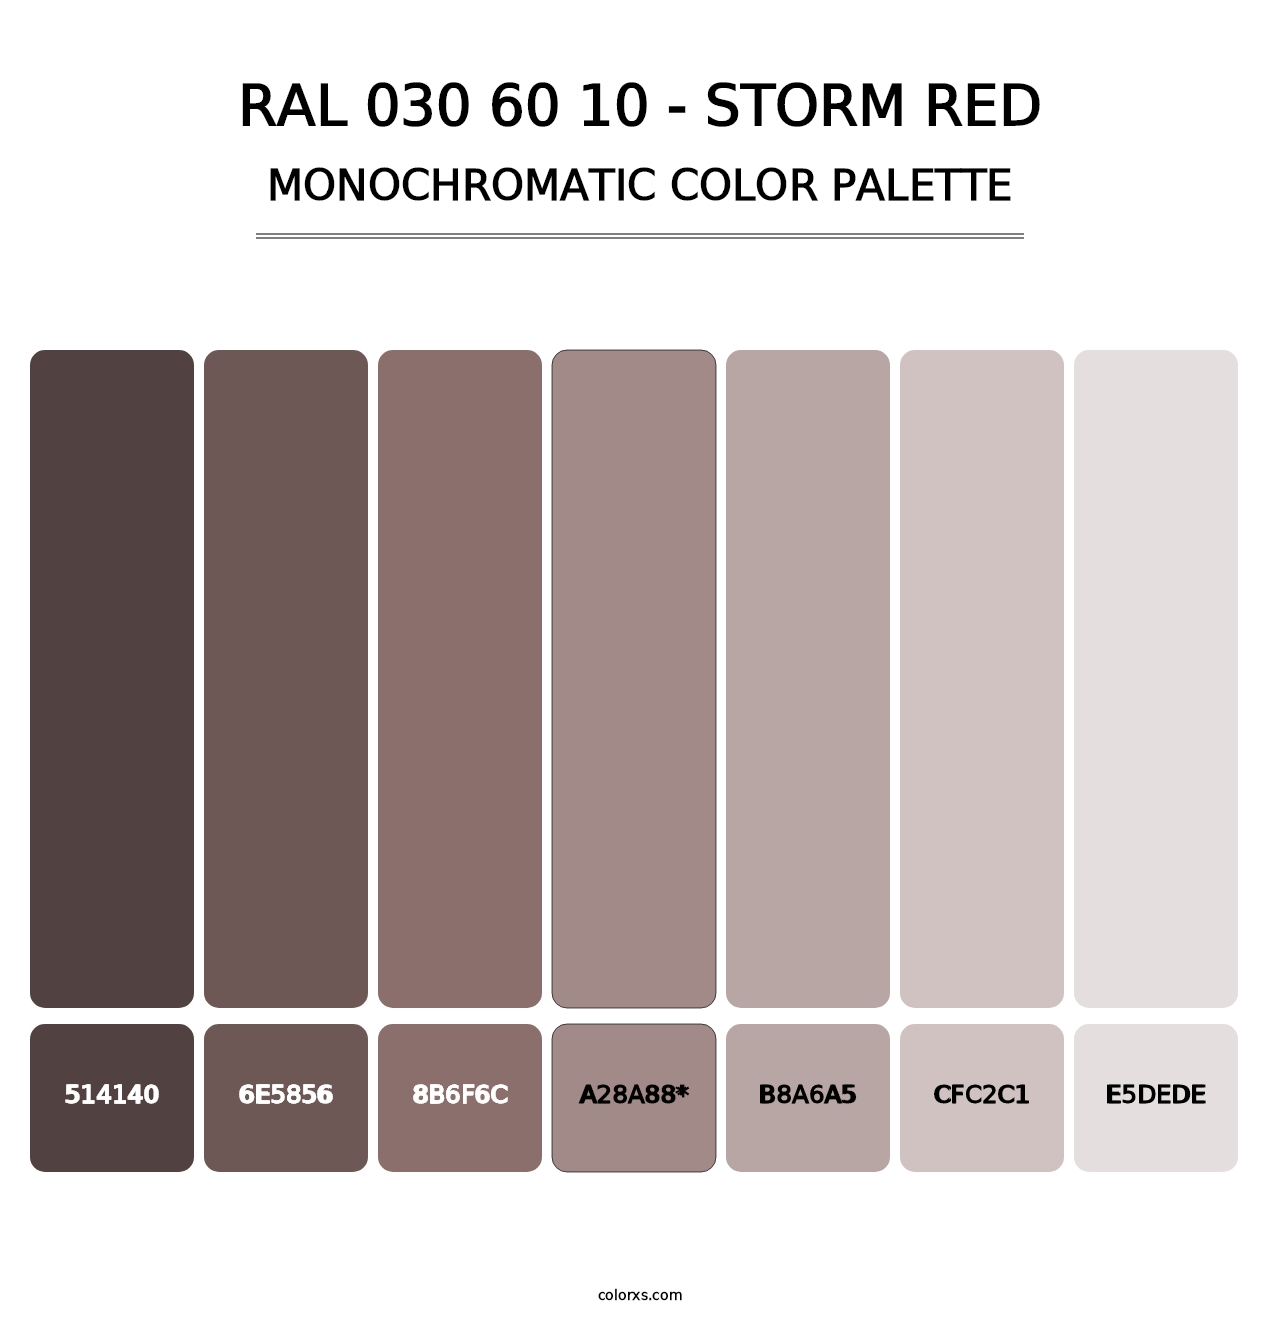 RAL 030 60 10 - Storm Red - Monochromatic Color Palette